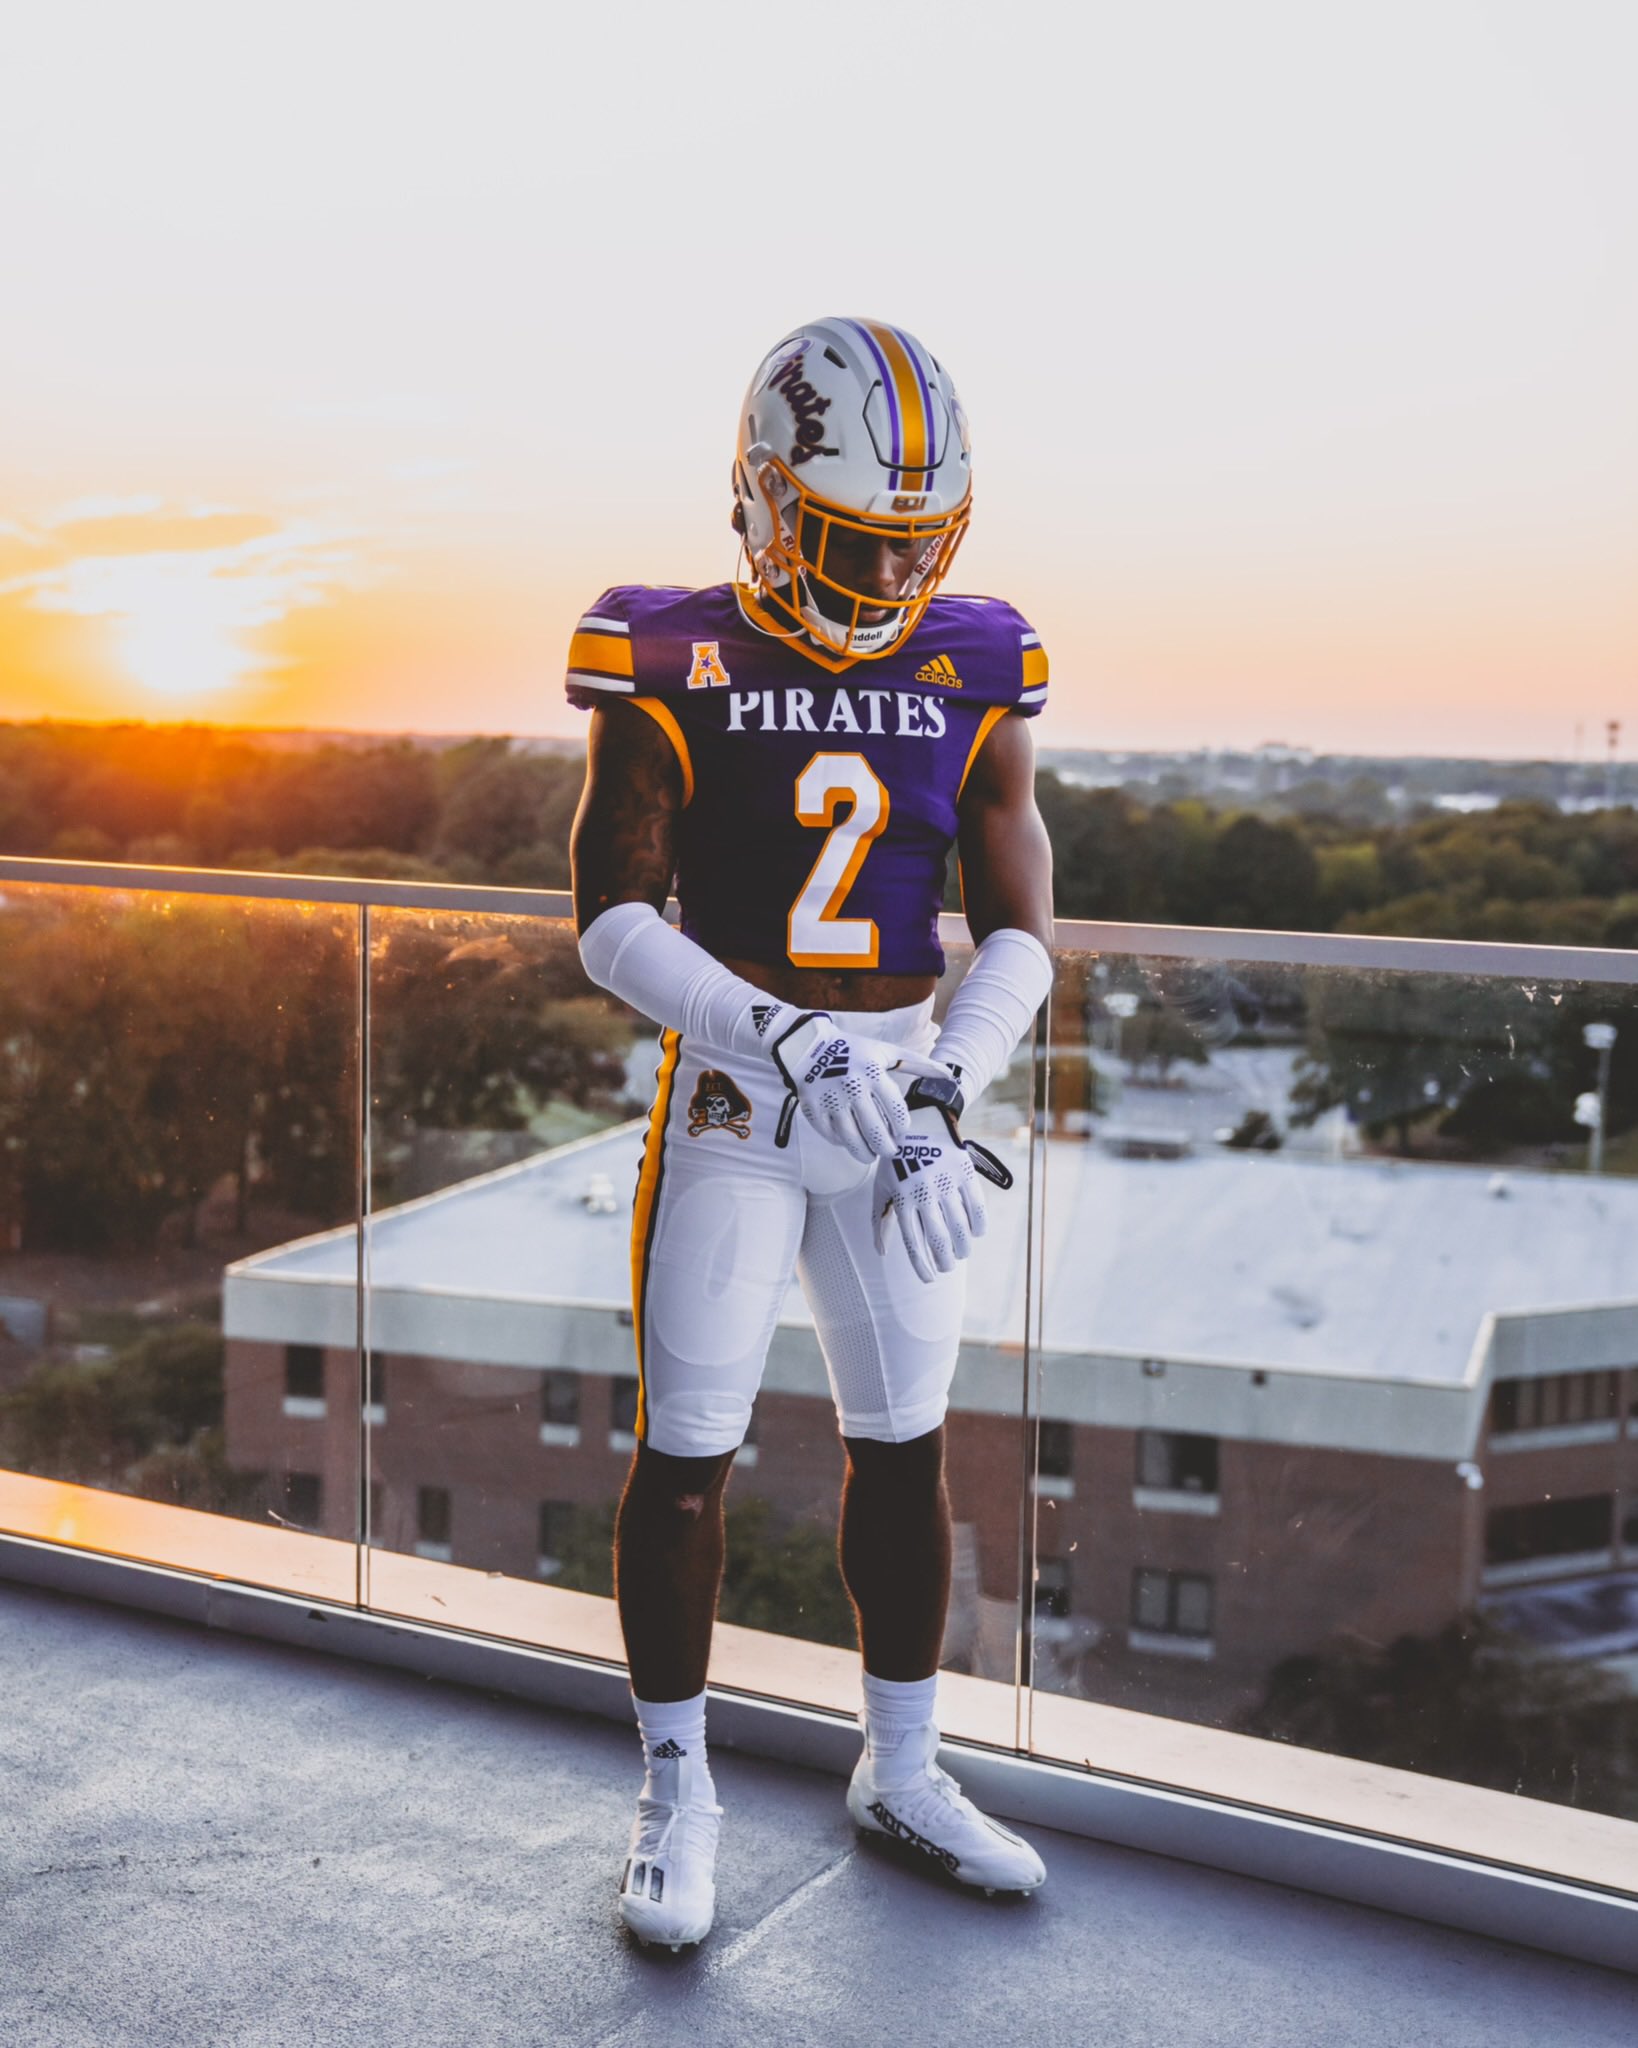 Will Treadaway on X: I am thrilled to finally be able to share my 2022 ECU  Football Uniform Design! My concept was a “Modern Throwback” Uniform! I  used elements from previous uniforms